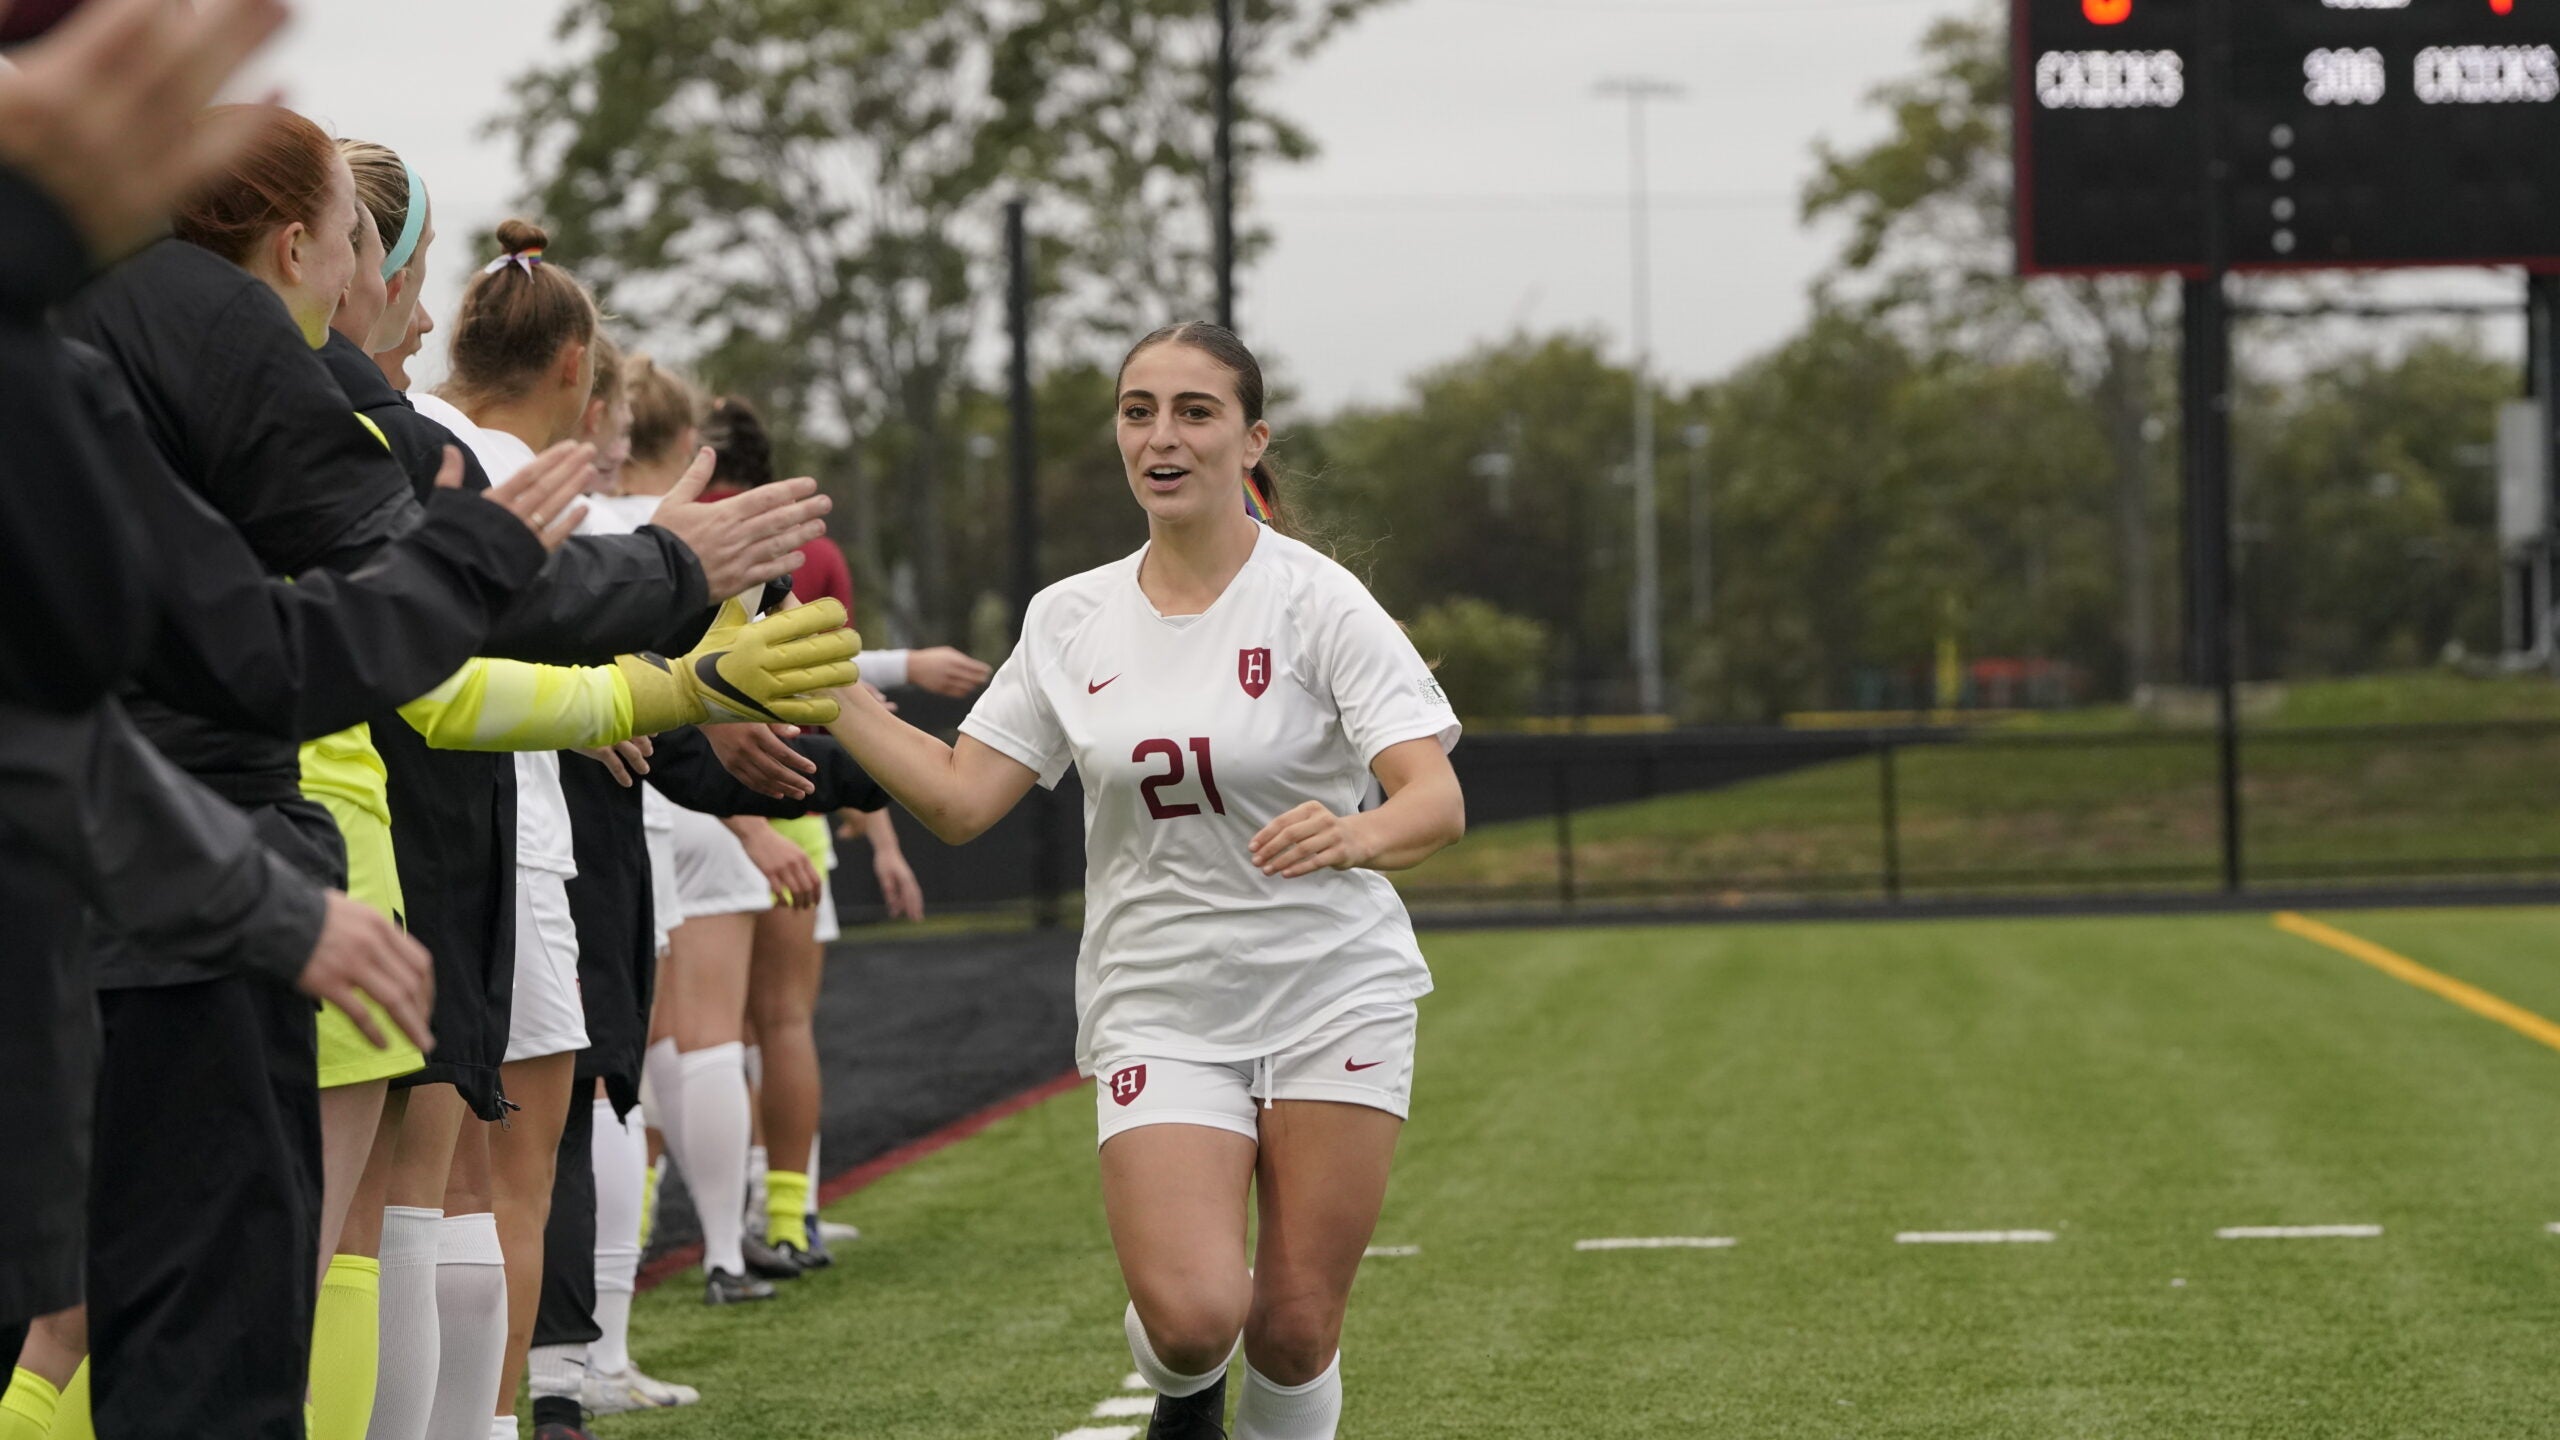 Female Harvard soccer player runs towards teammates to give a high five